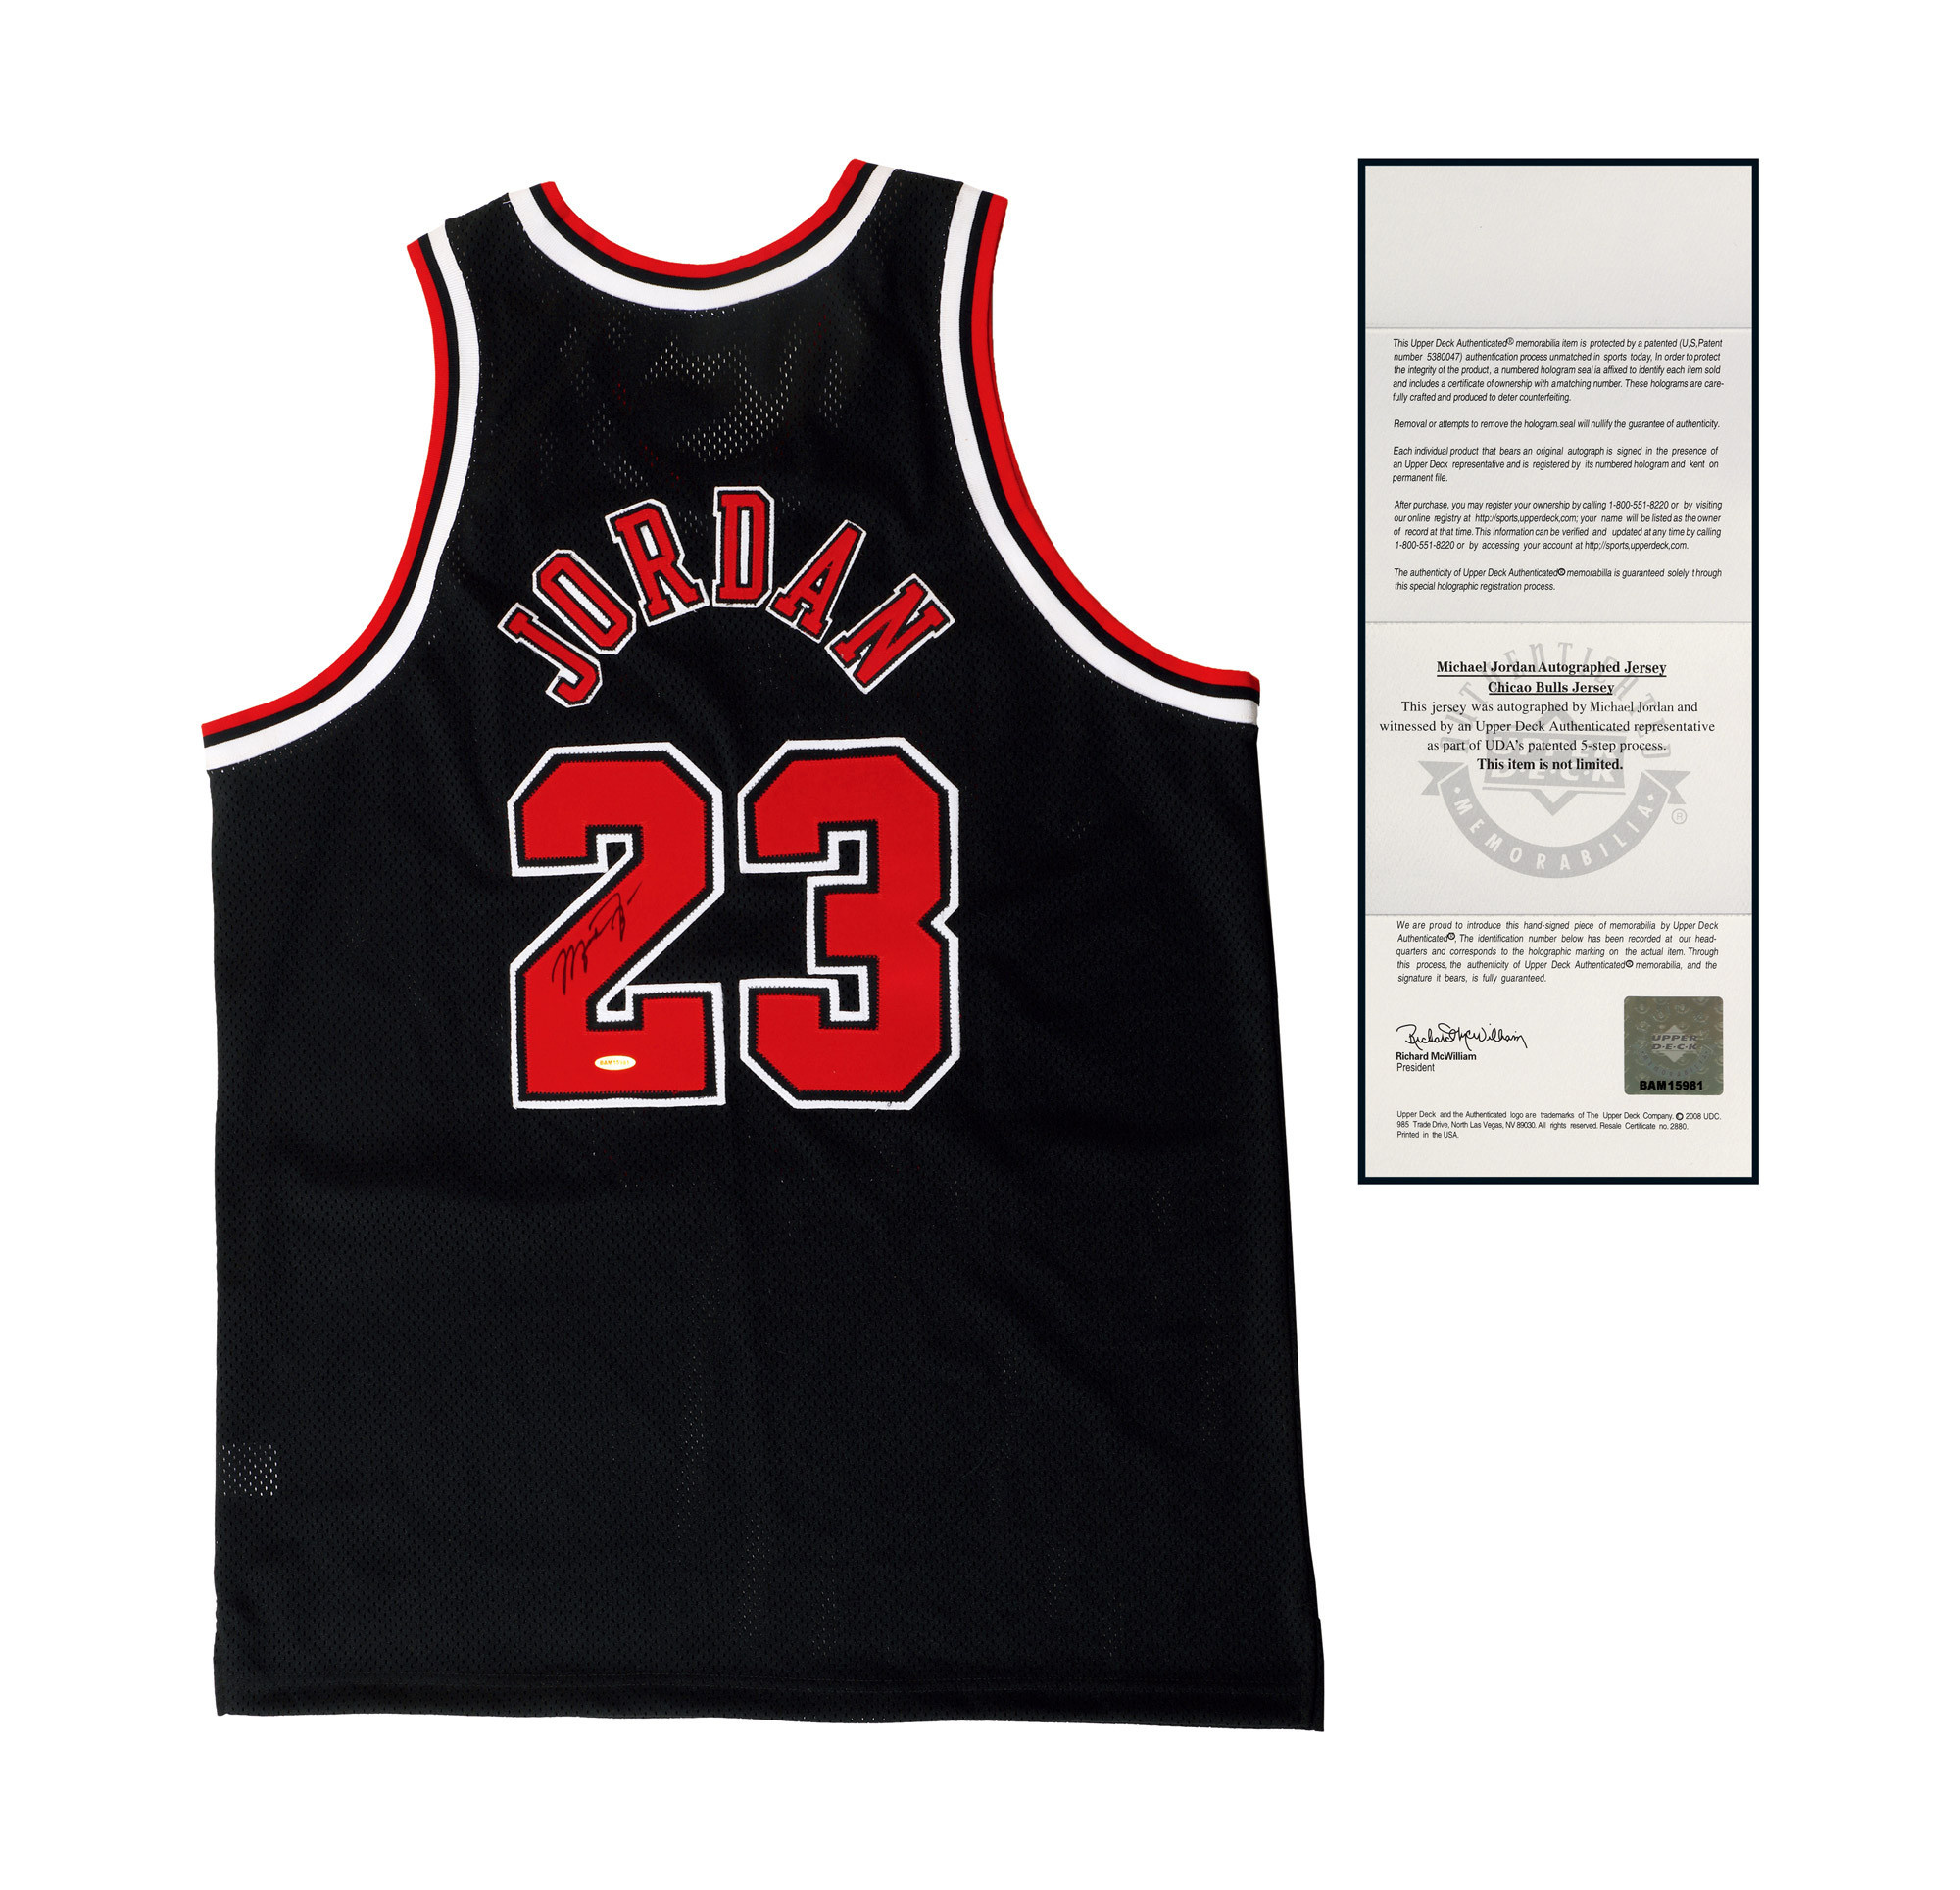 The autographed Bulls jersey signed by Michael Jordan, with certificate